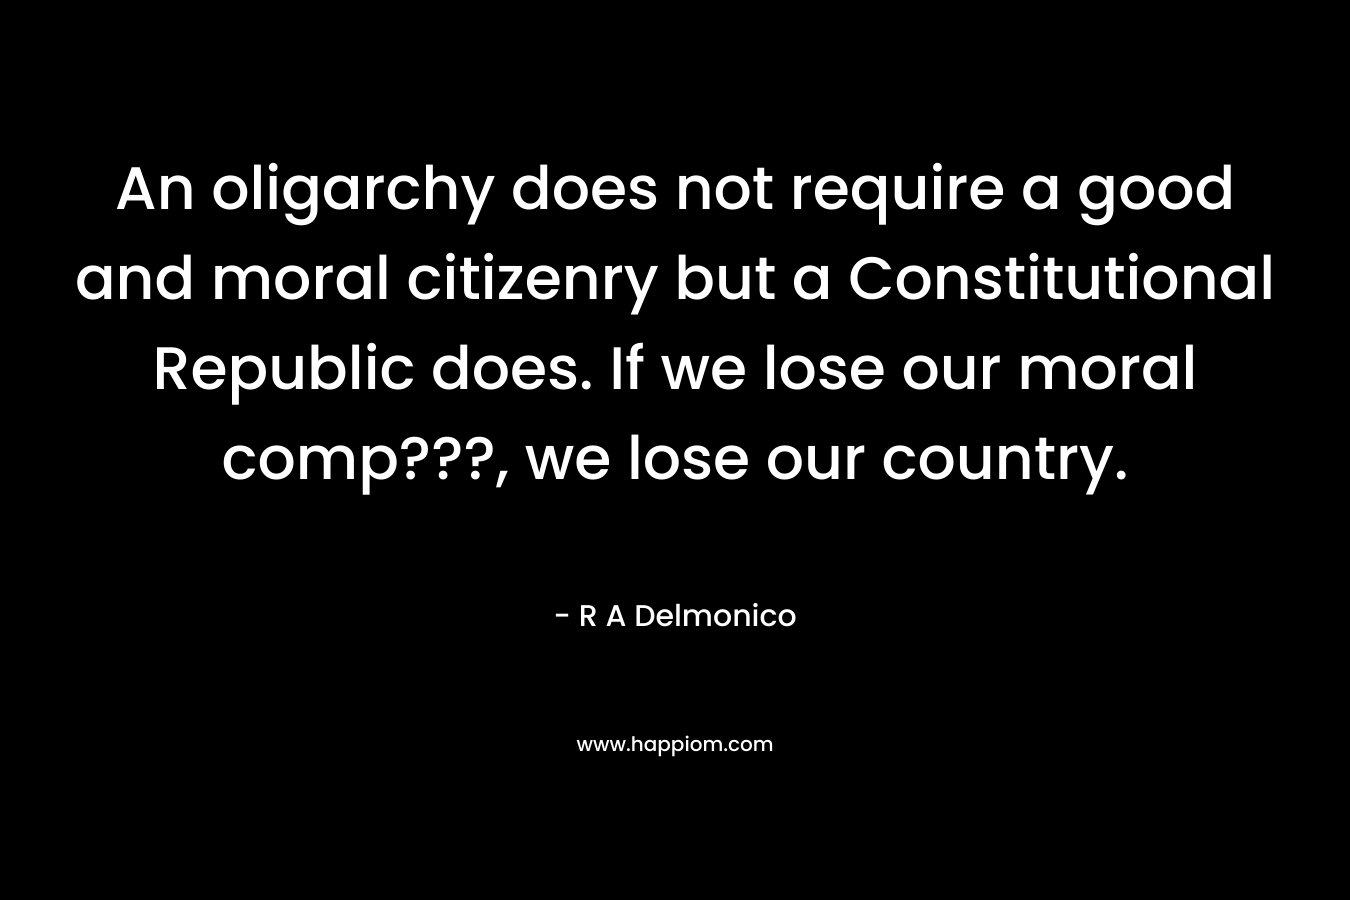 An oligarchy does not require a good and moral citizenry but a Constitutional Republic does. If we lose our moral comp???, we lose our country.